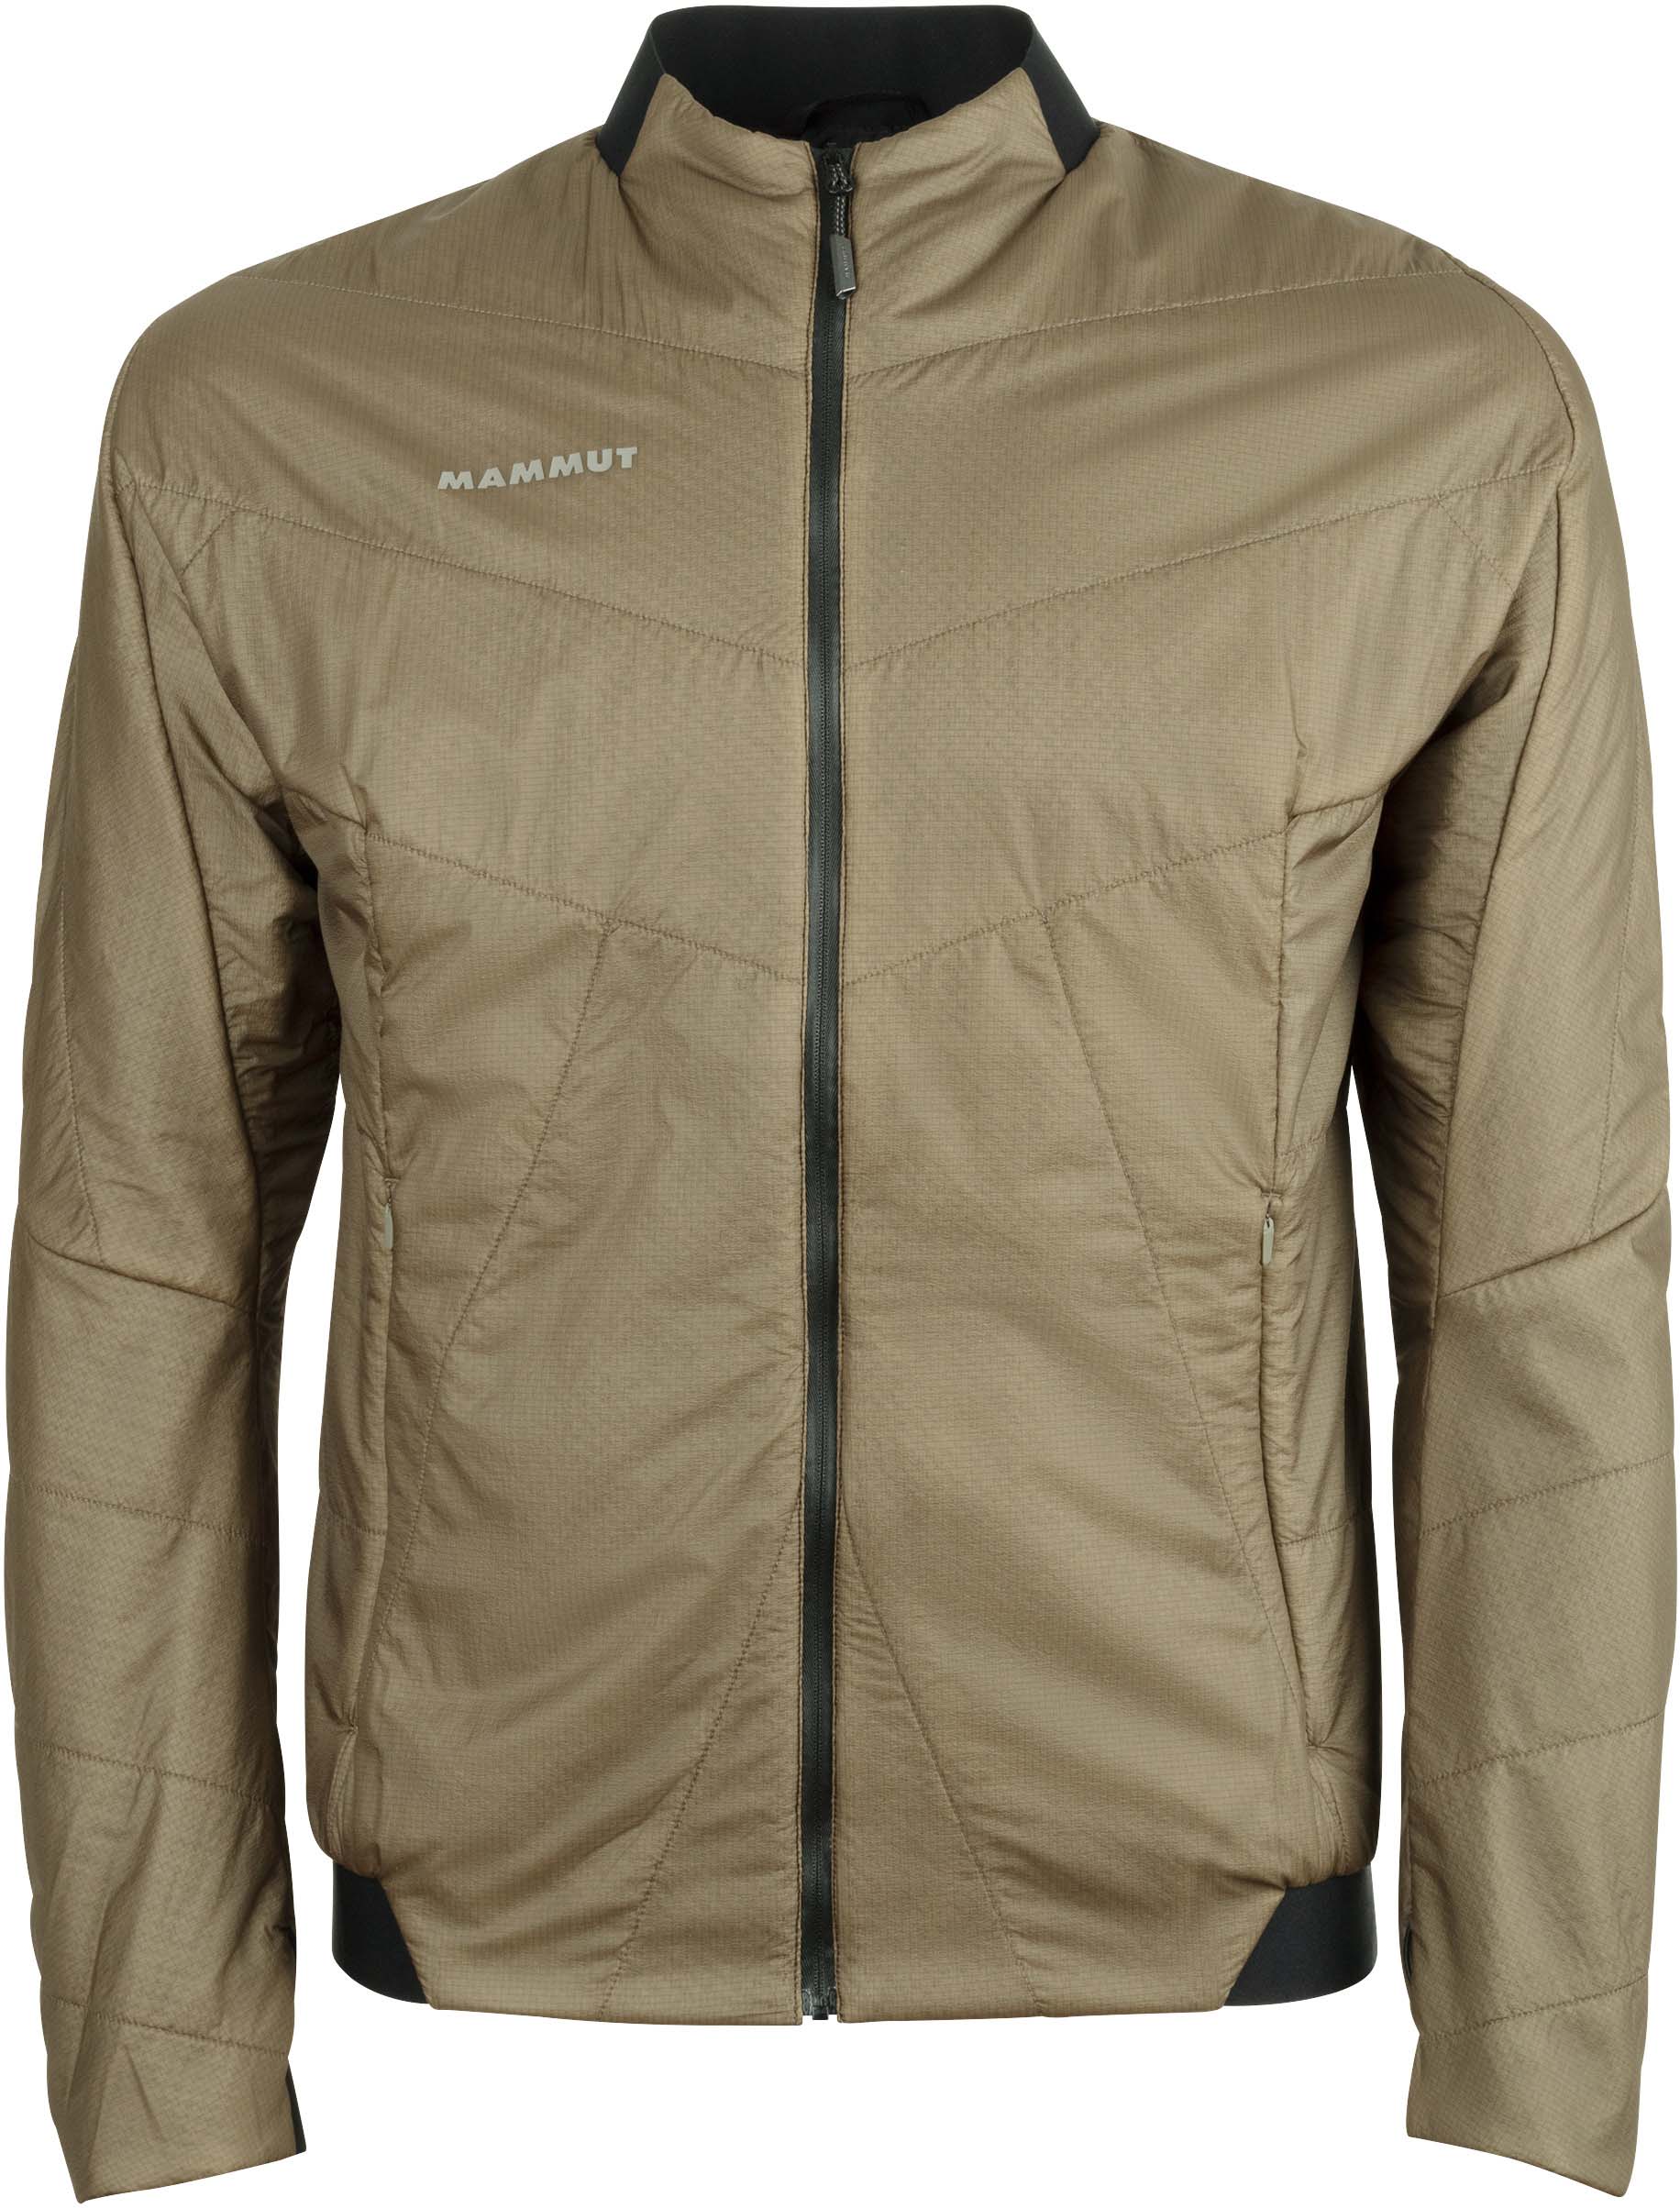 Mammut 3850 Insulated Bomber Jacket Men S Up To 50 Off Customer Rated W Free S H